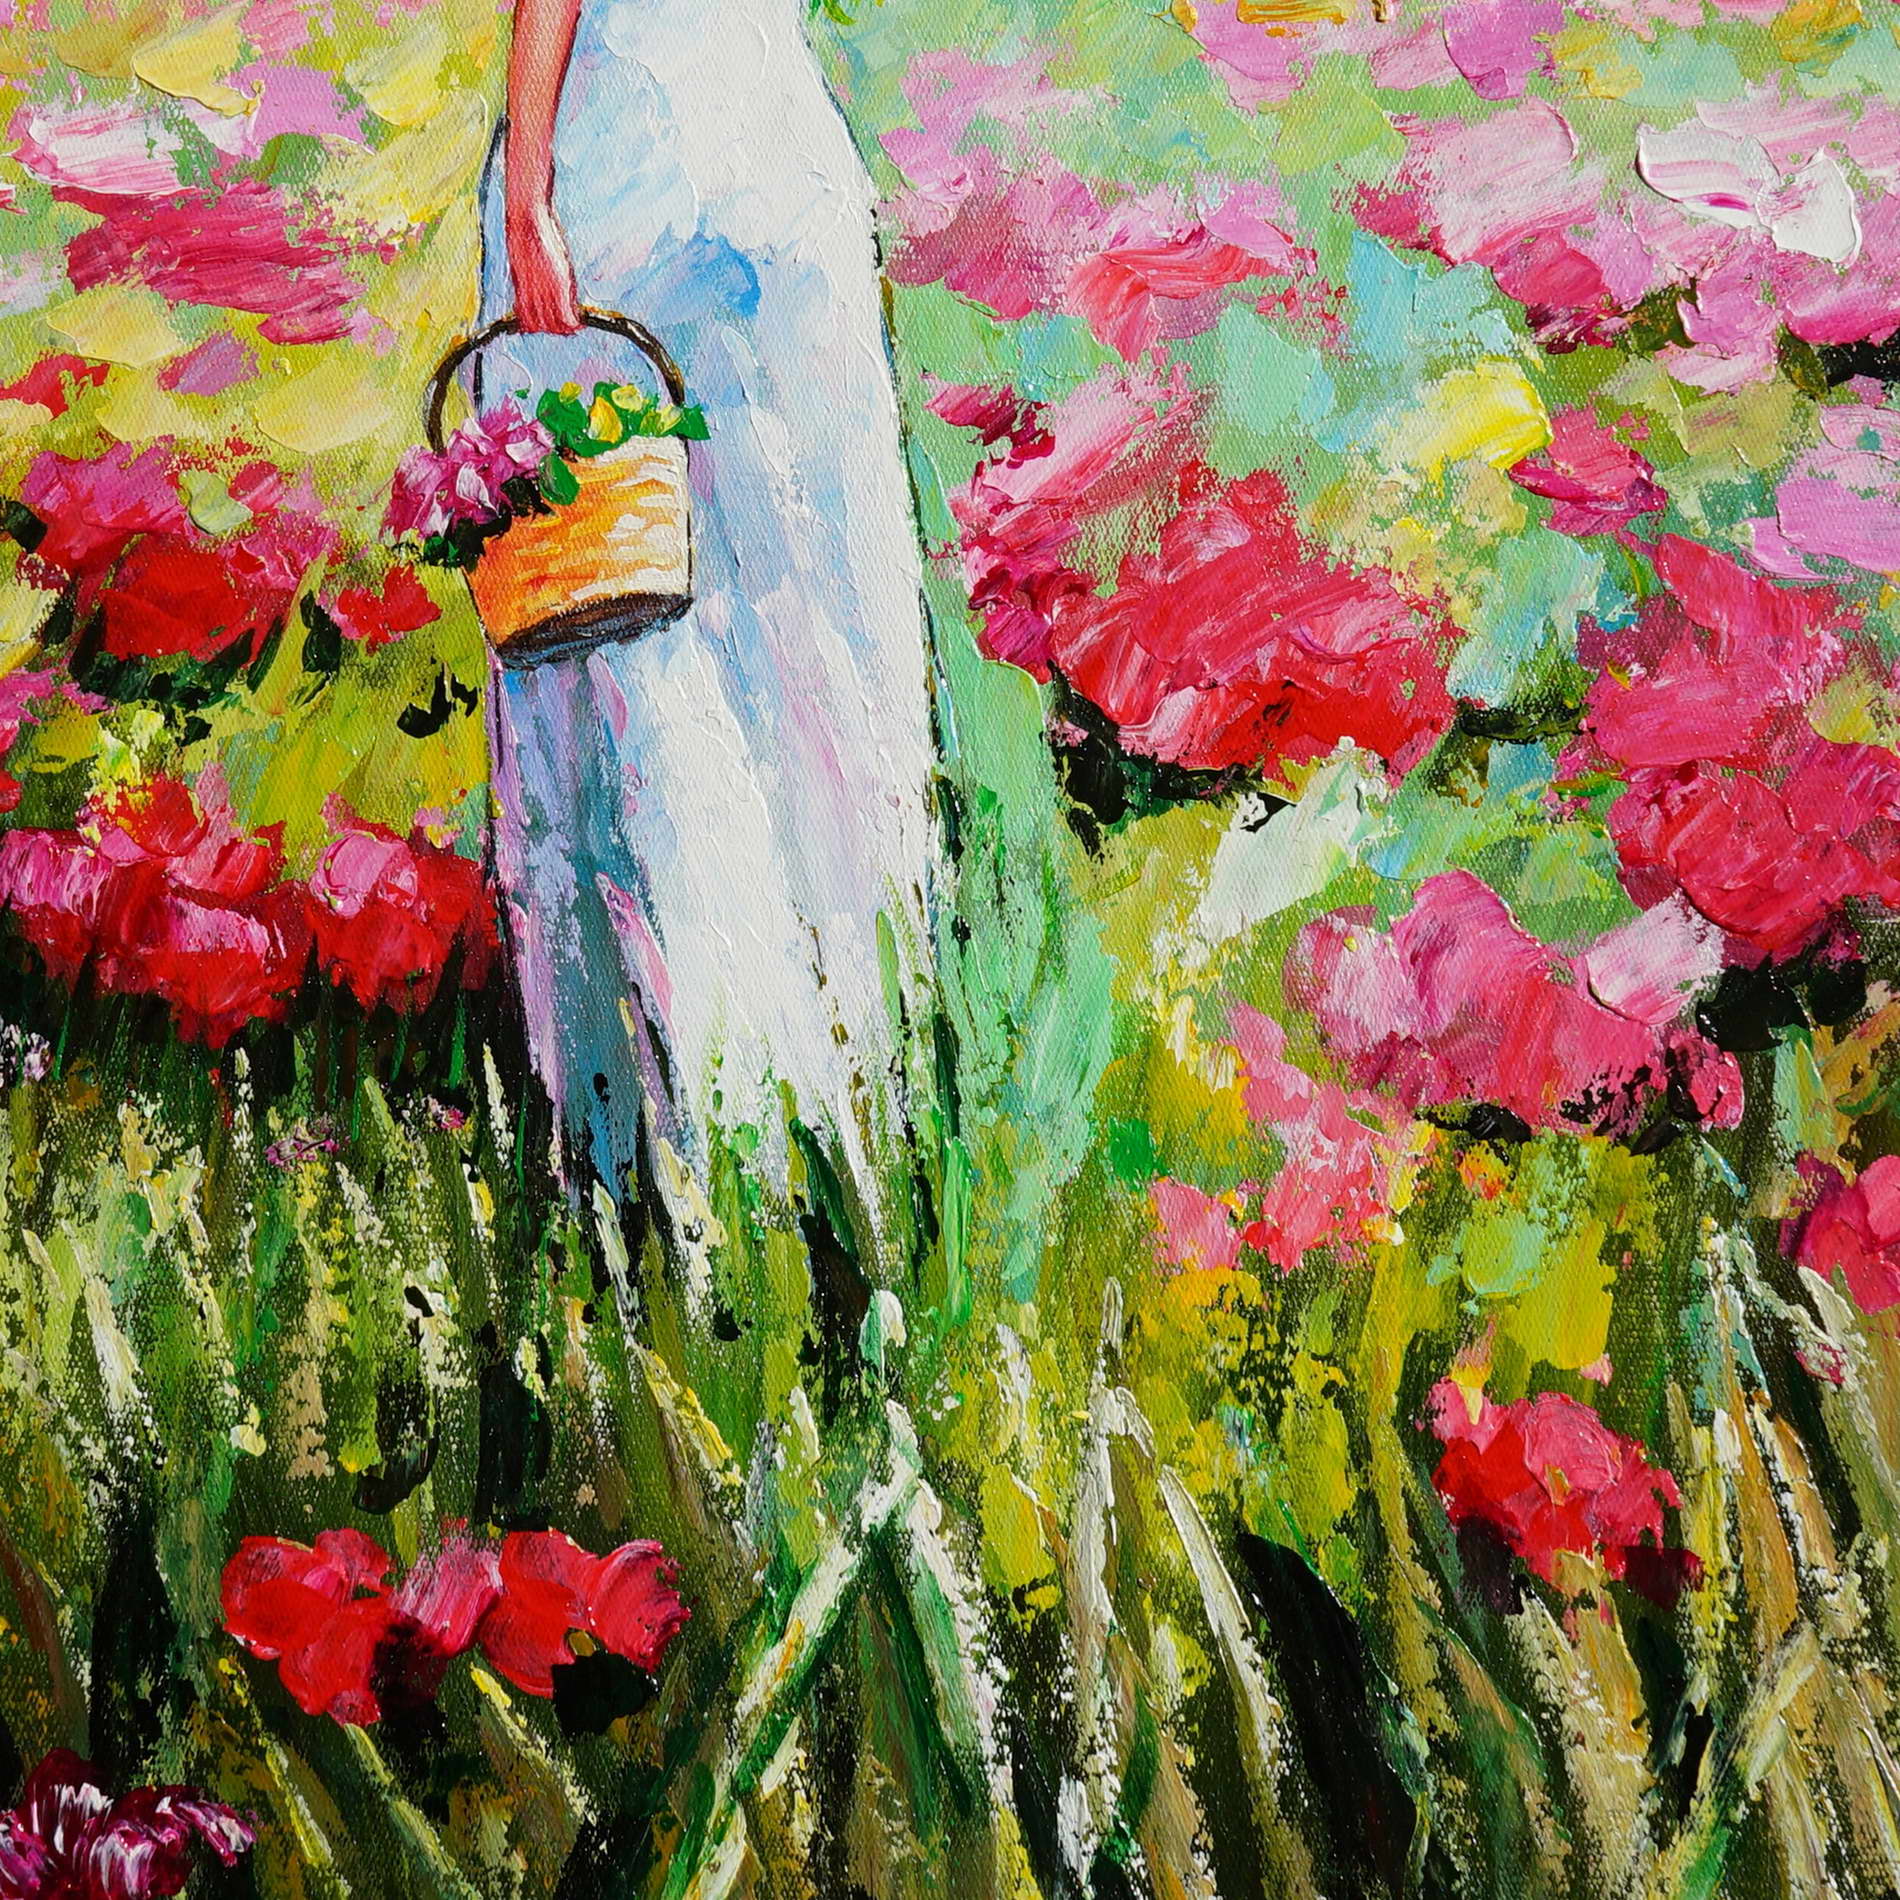 Hand painted Lady in a Field of Flowers 50x70cm